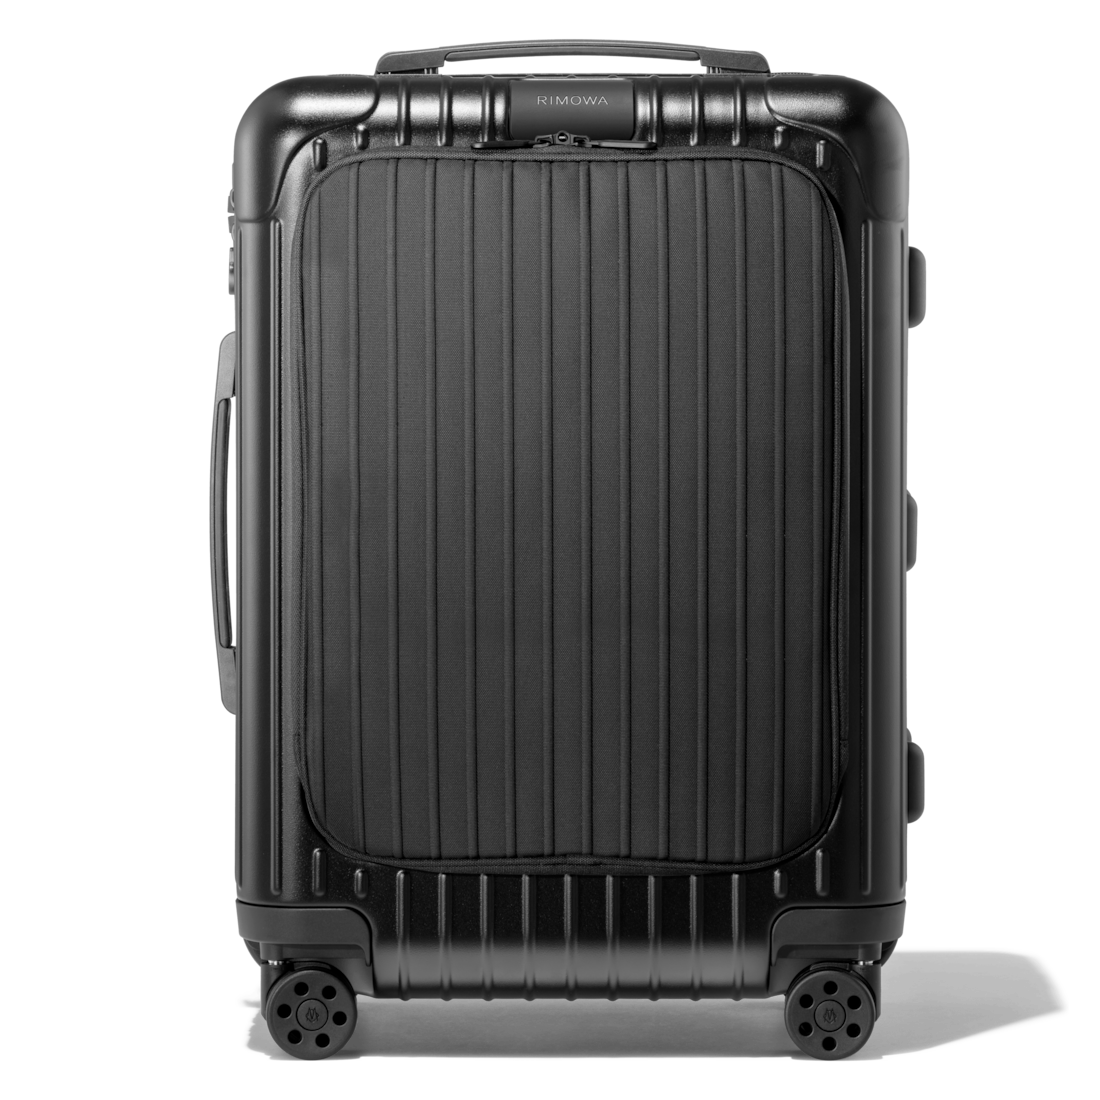 RIMOWA Essential Sleeve Cabin: Best Carry-Luggage for Frequent Flyers